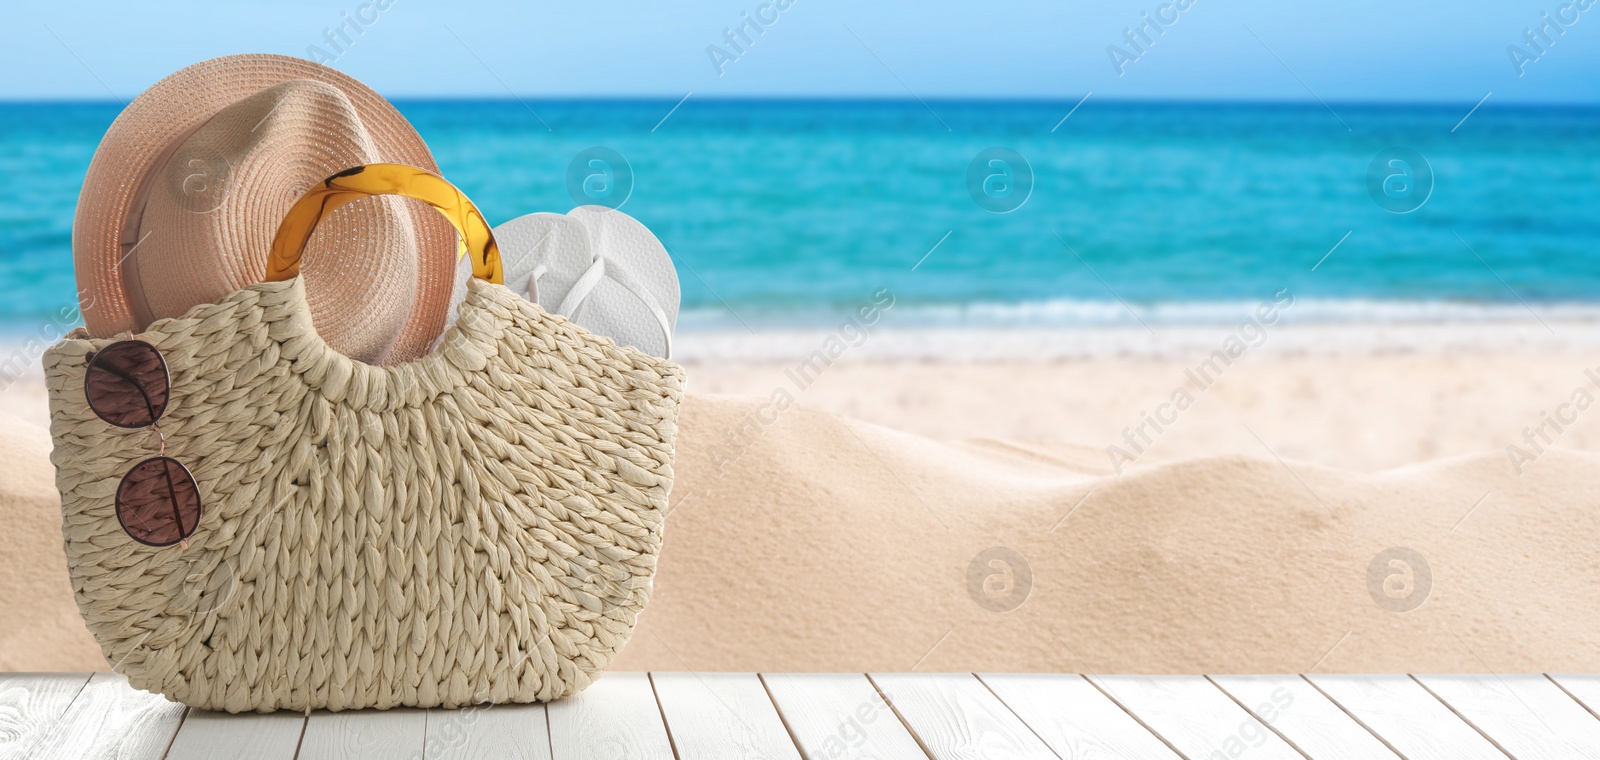 Image of Beach accessories on wooden surface near ocean, space for text. Banner design 